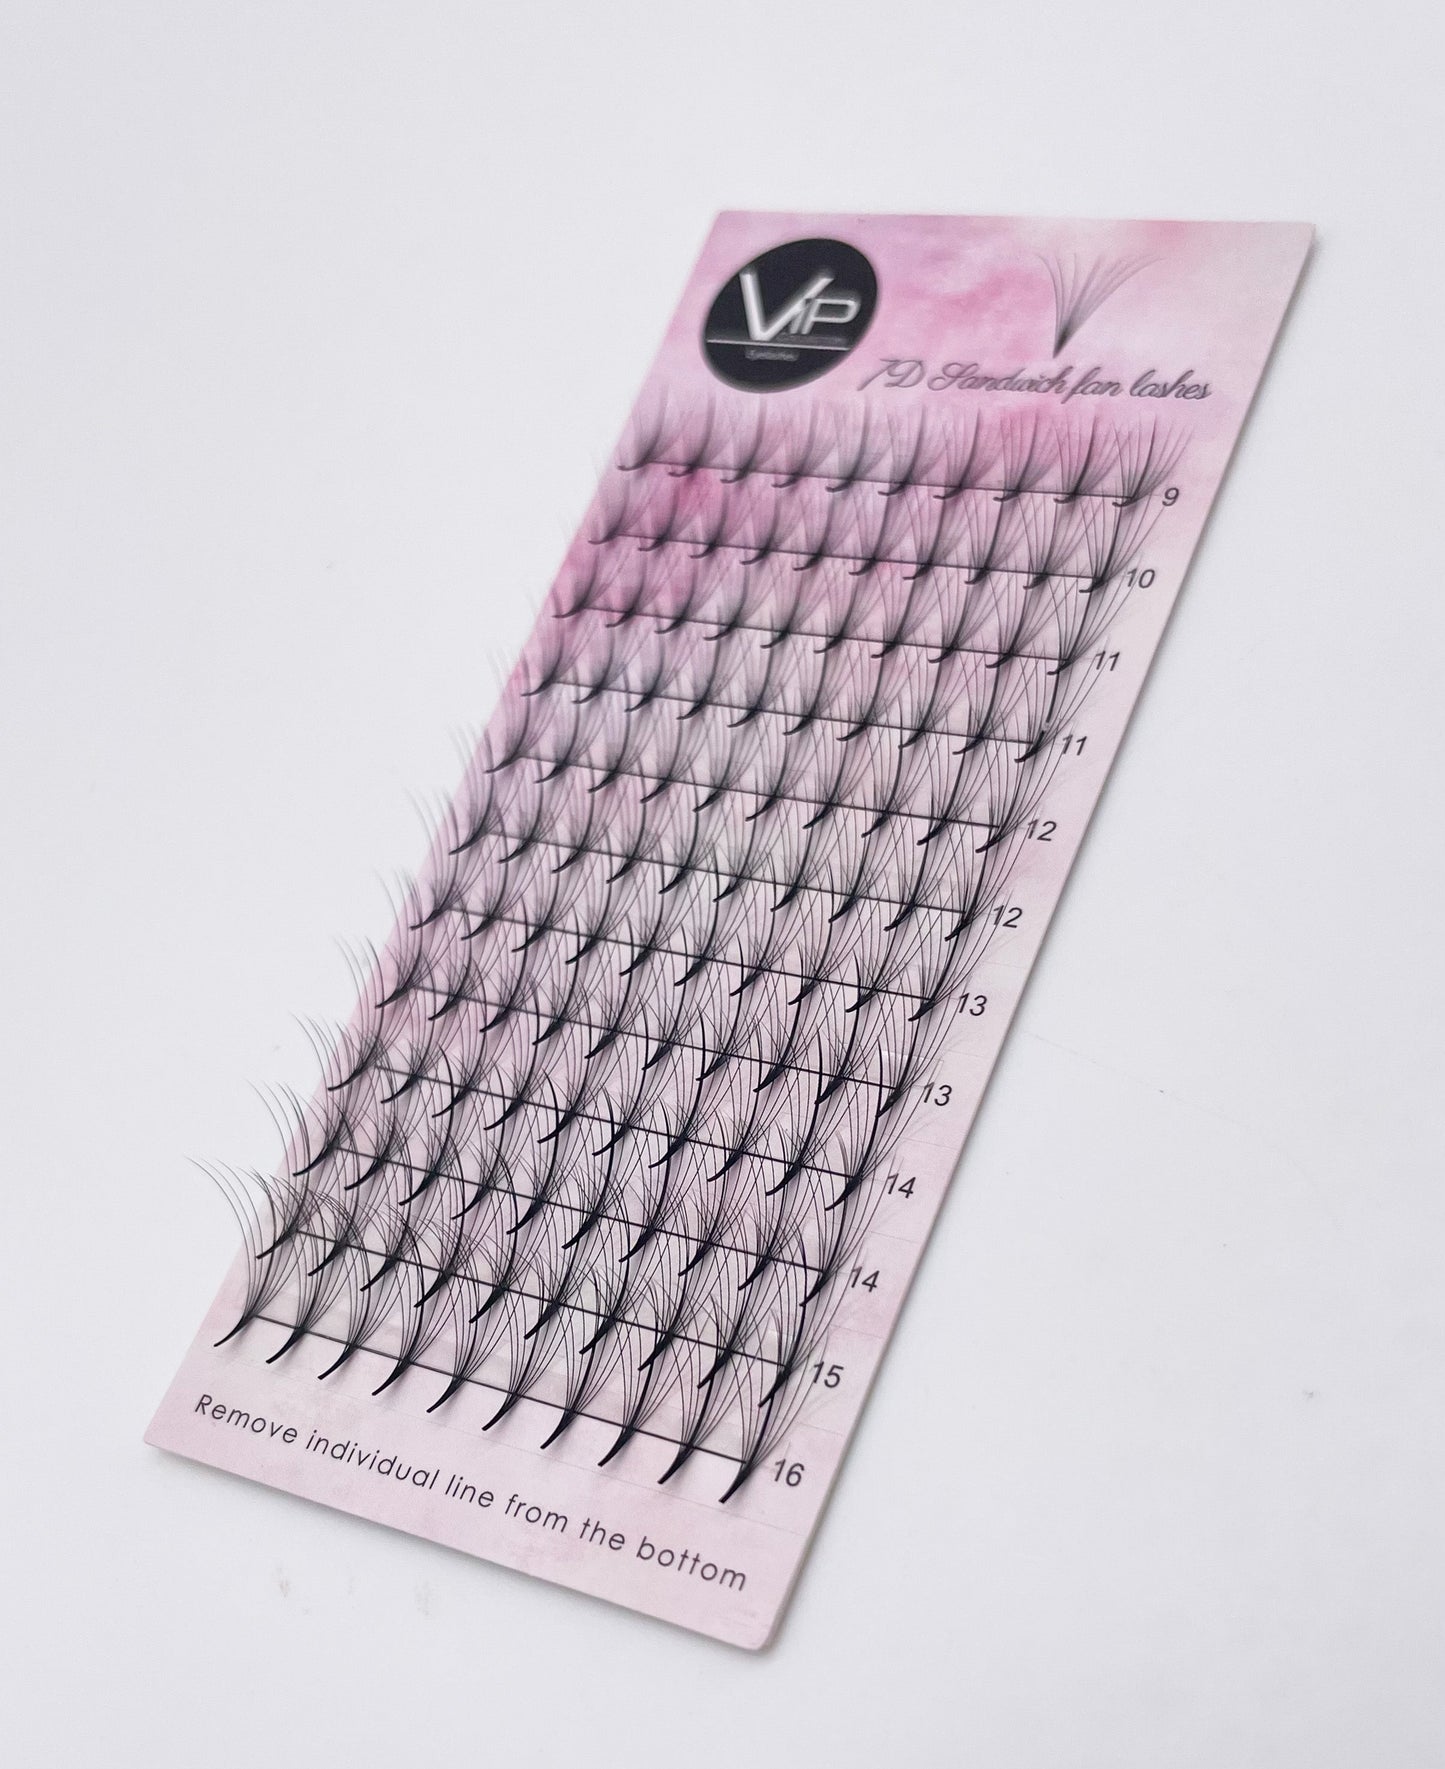 VIP 7D Sandwich Fan Lashes 0.05 12 lines C Mix - D Mix - Regular and Large Trays - VIP Extensions